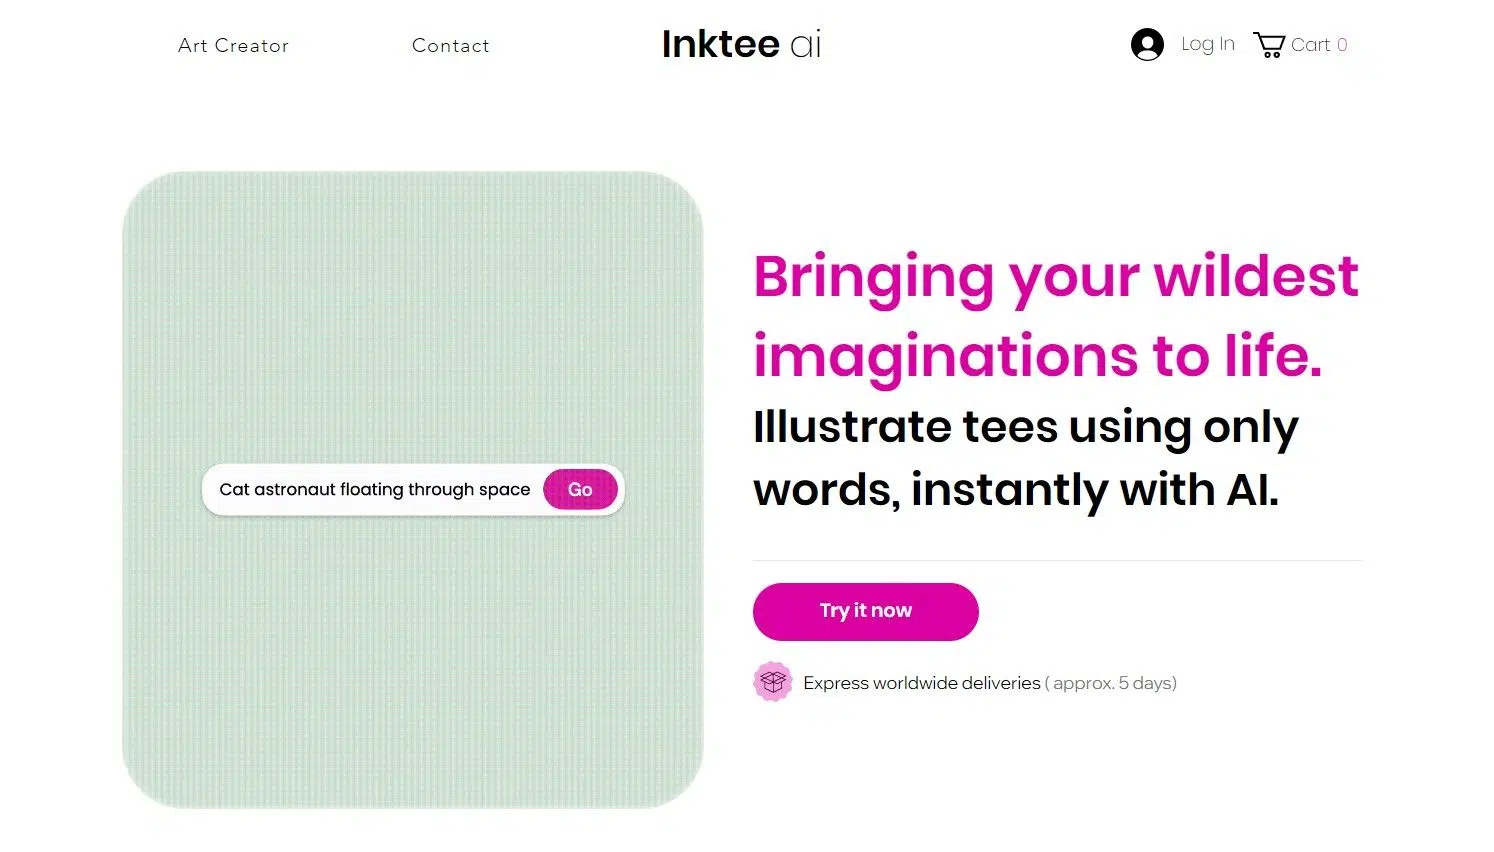 Inktee aiwebsite picture